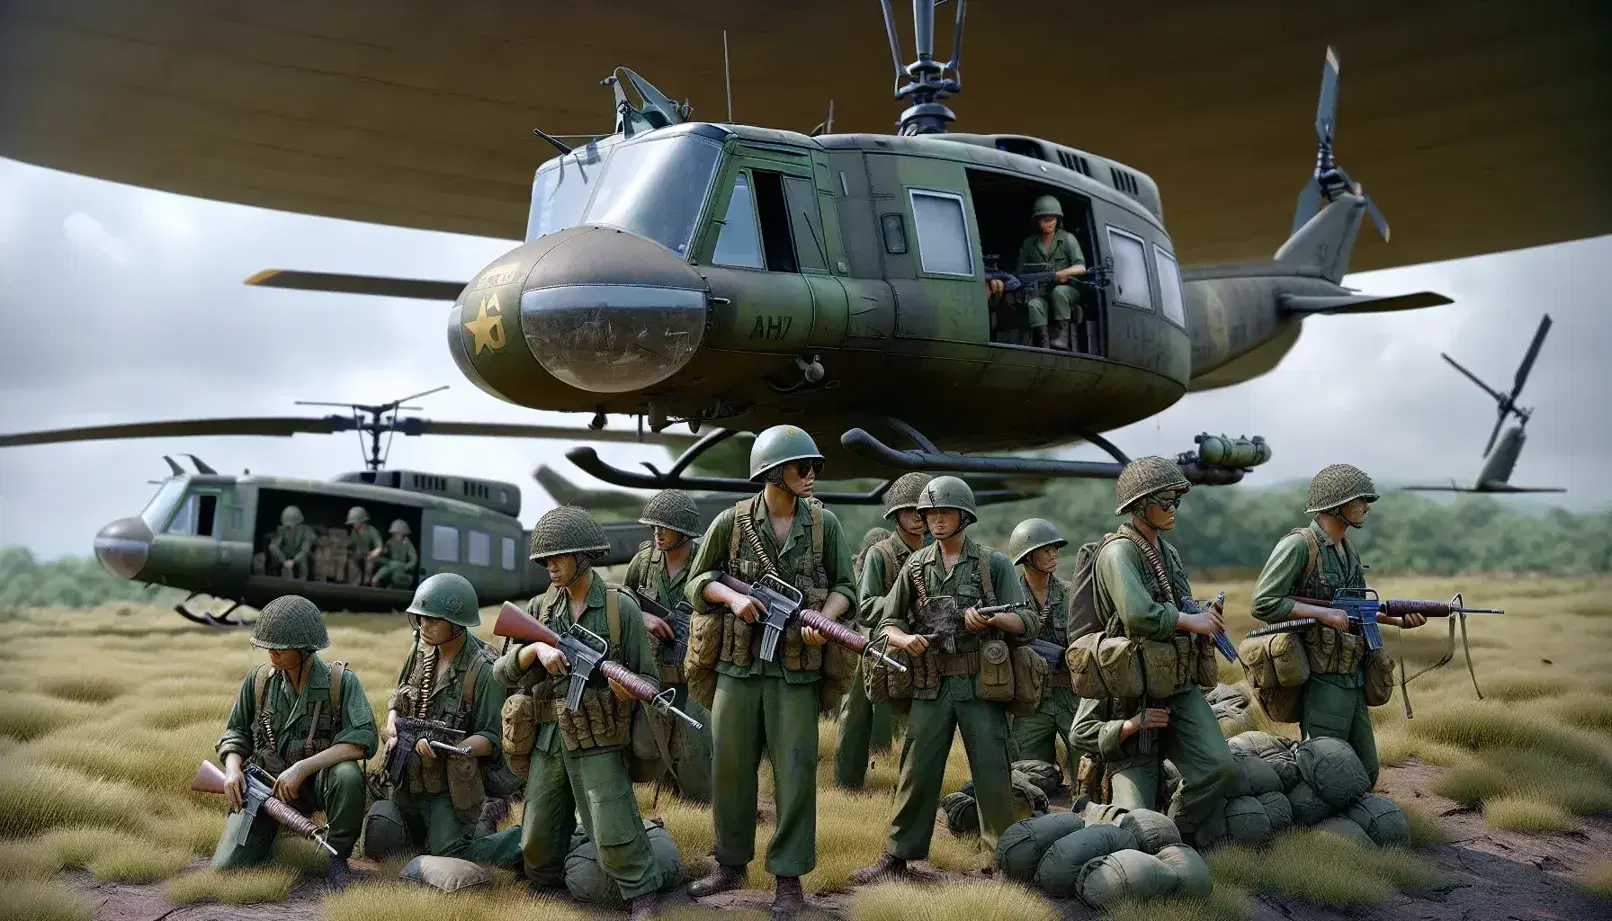 South Vietnamese soldiers in olive uniforms with M16s, near a camouflaged UH-1 Huey helicopter on a grassy field during the Vietnam War era.